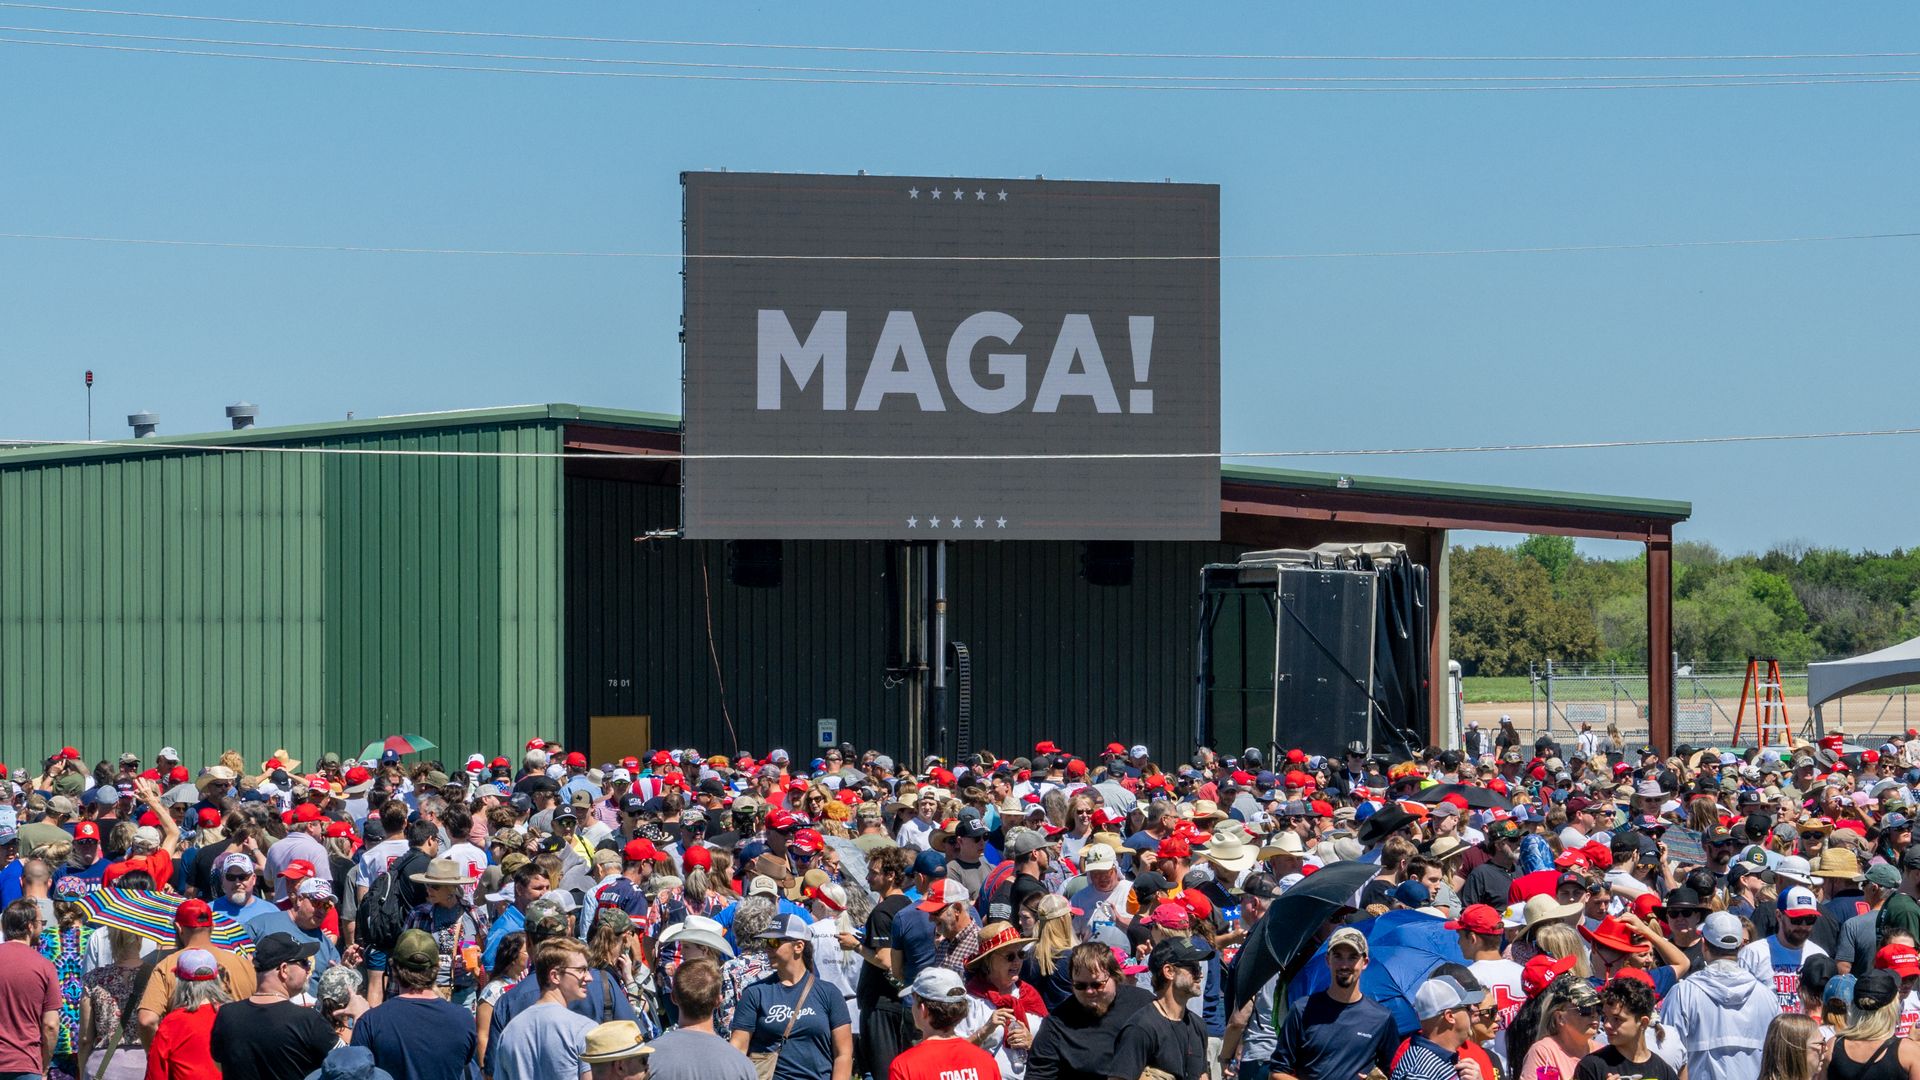 Supporters of former President Trump arrive for his campaign rally at the Waco, Texas, airport on Saturday. Photo: SUZANNE CORDEIRO/AFP via Getty Images